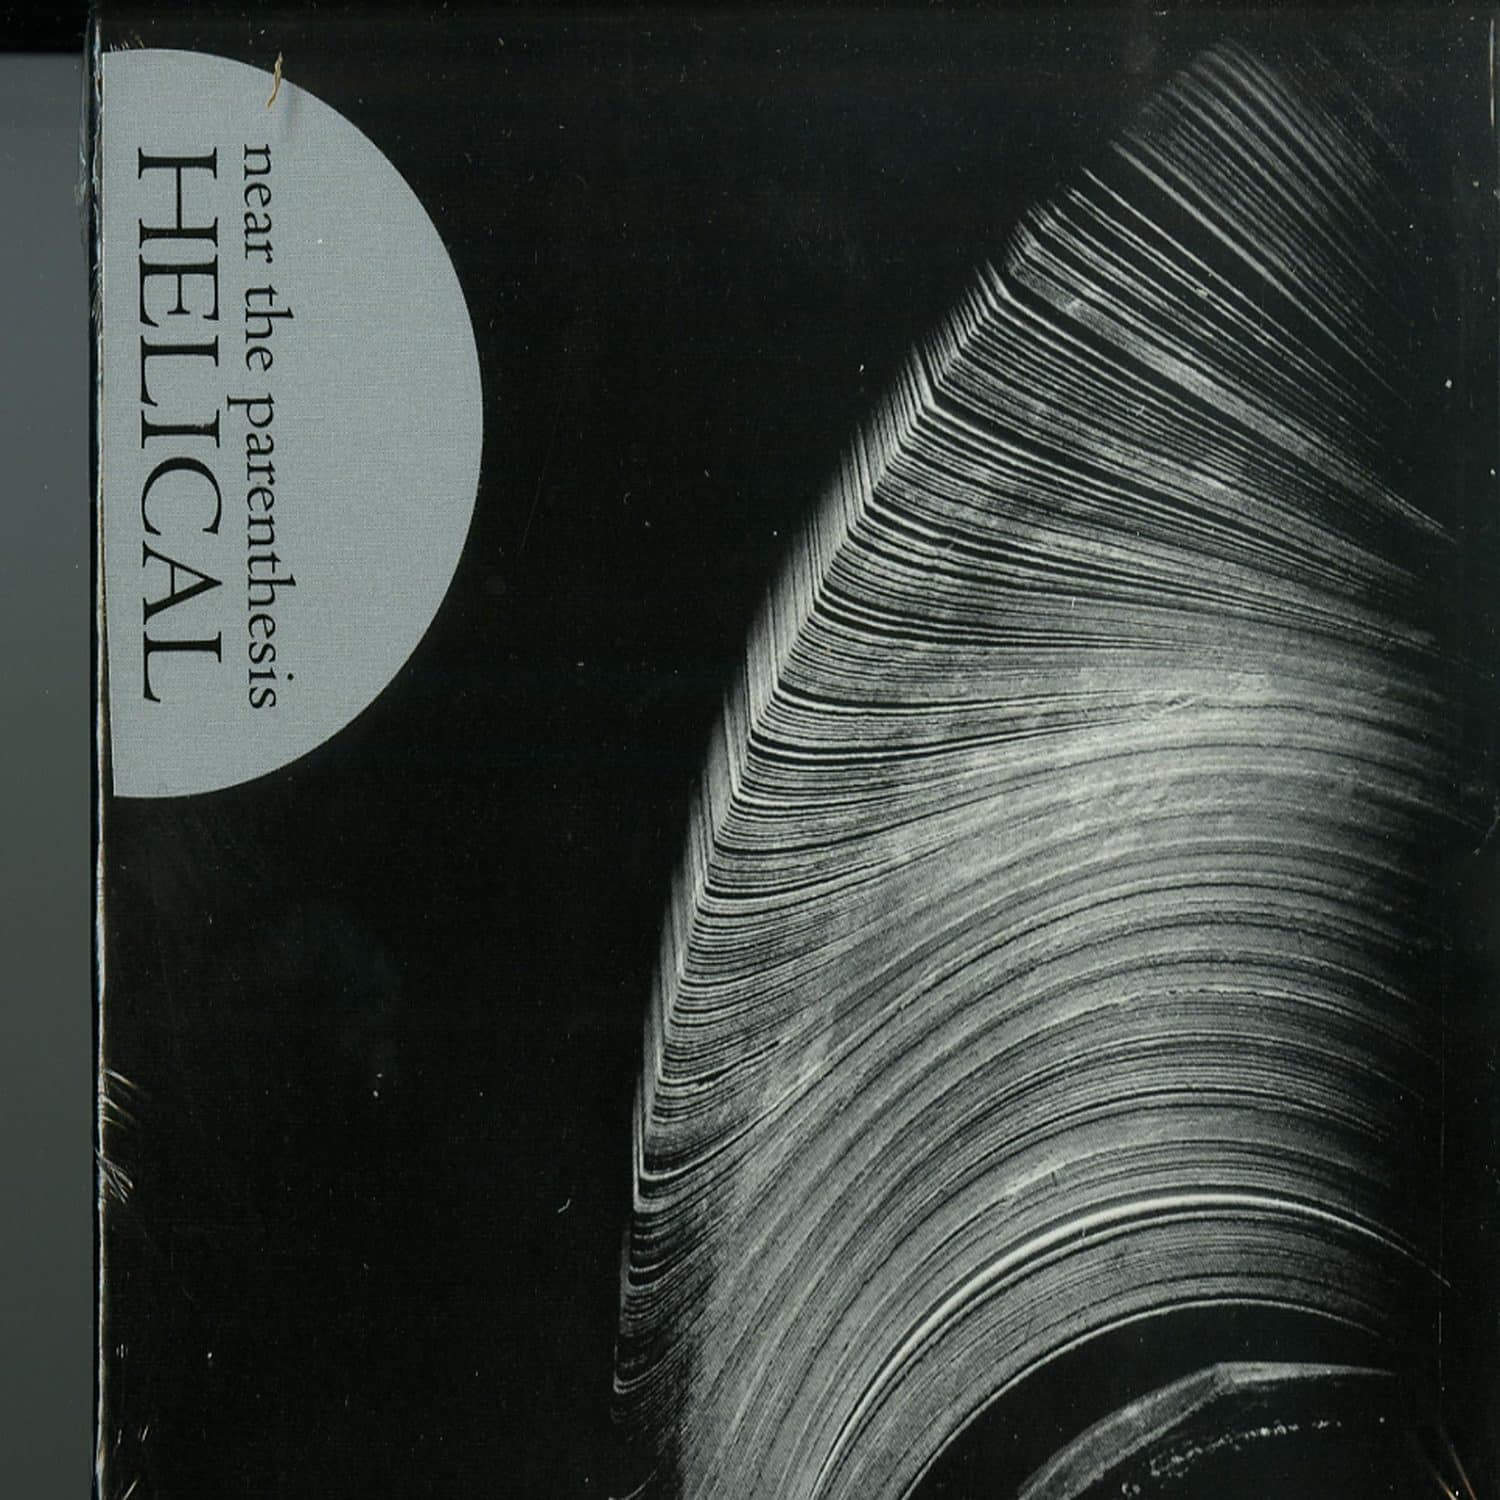 Helical - NEAR THE PARENTHESIS 